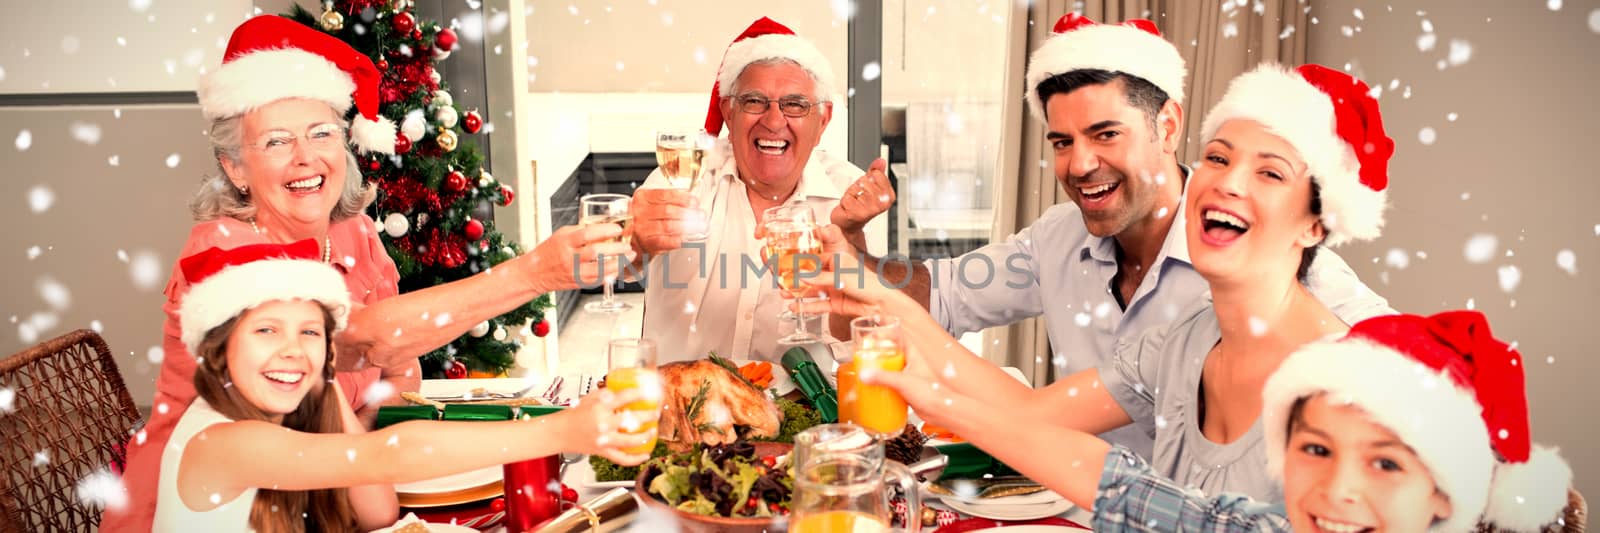 Composite image of family in santas hats toasting wine glasses at dining table by Wavebreakmedia